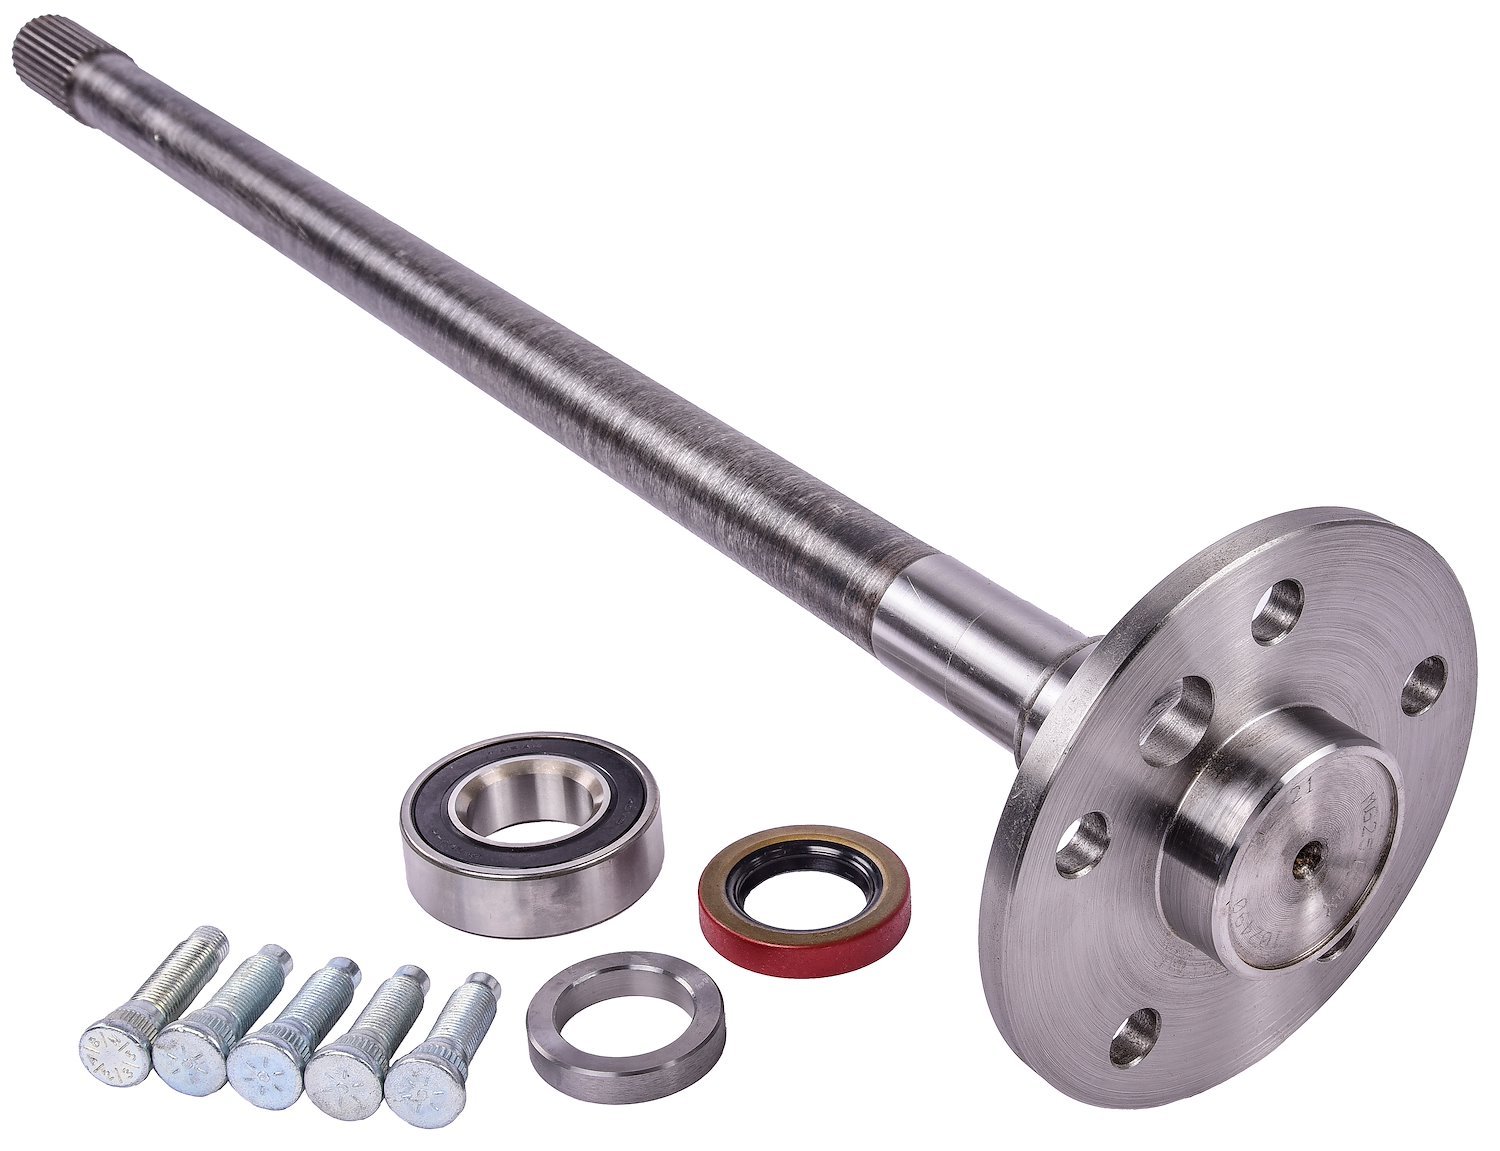 Rear Axle Shaft for 1967-1970 Ford Mustang & Mercury Cougar, Left/Driver Side [Ford 9 in. 31 Spline]